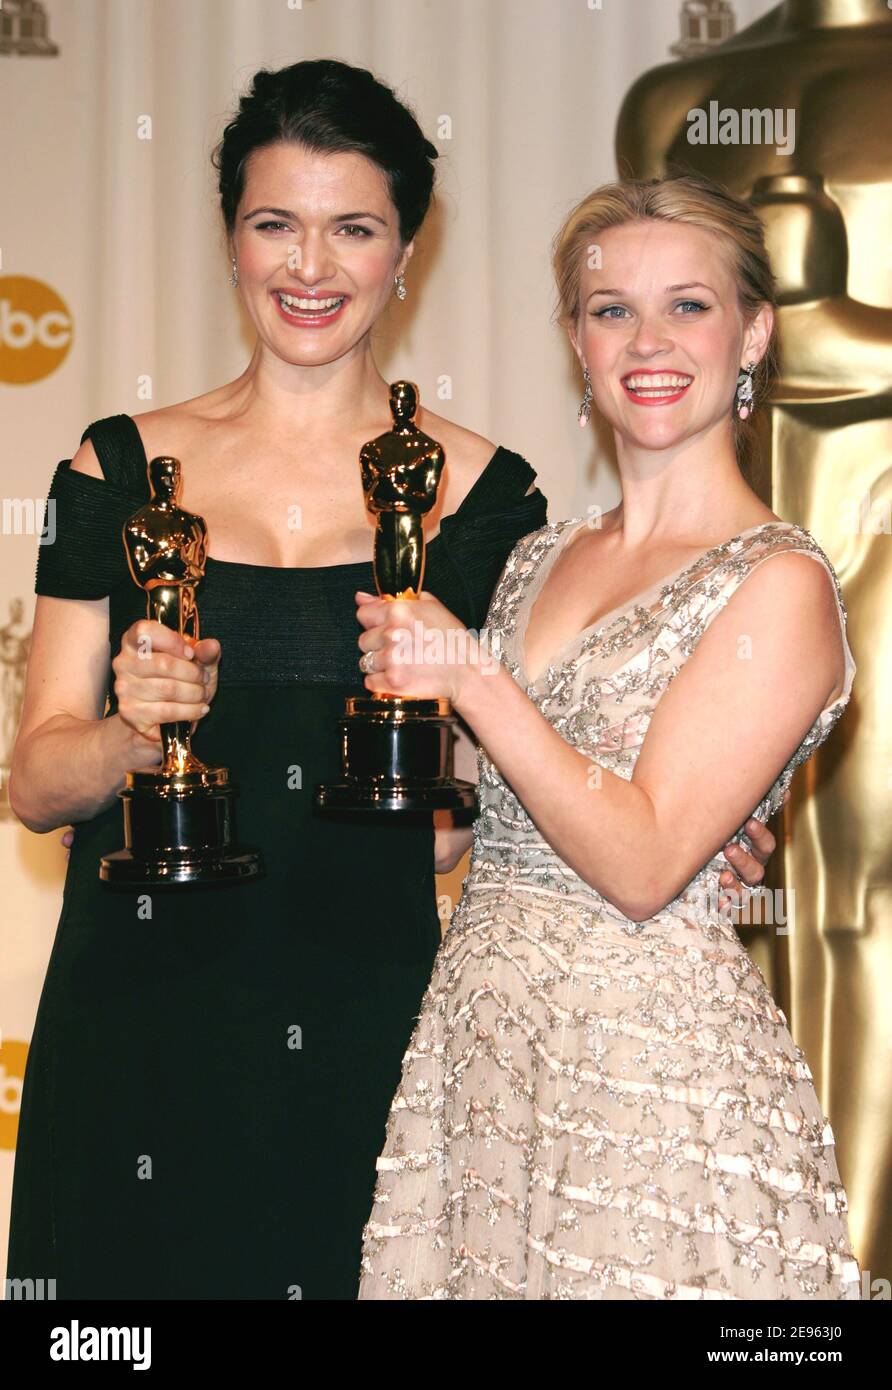 Reese Witherspoon with the Award for Best Actress in a Leading Role for Walk The Line (r) with Rachel Weisz and her award for Performance by an Actress in a Supporting Role for The Constant Gardener during the 78th annual Academy Awards ceremony, at the Kodak Theatre in Hollywood, Los Angeles, Sunday 5 March 2006. Photo by Hahn-Khayat-Nebinger/ABACAPRESS.COM Stock Photo